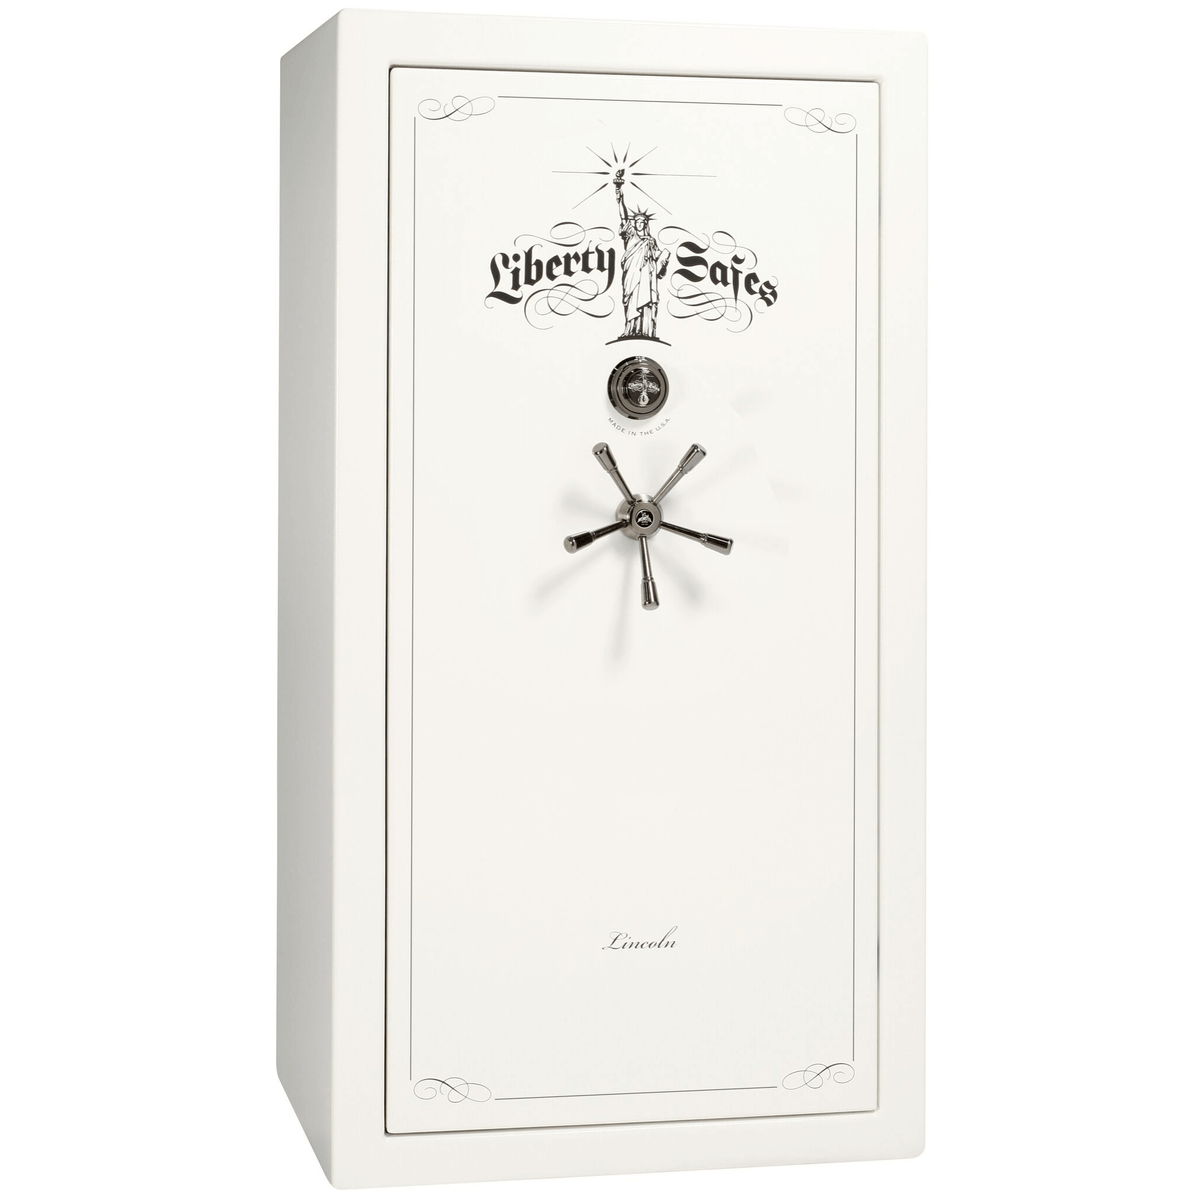 Liberty Lincoln 40 Safe in White Gloss with Black Chrome Mechanical Lock.